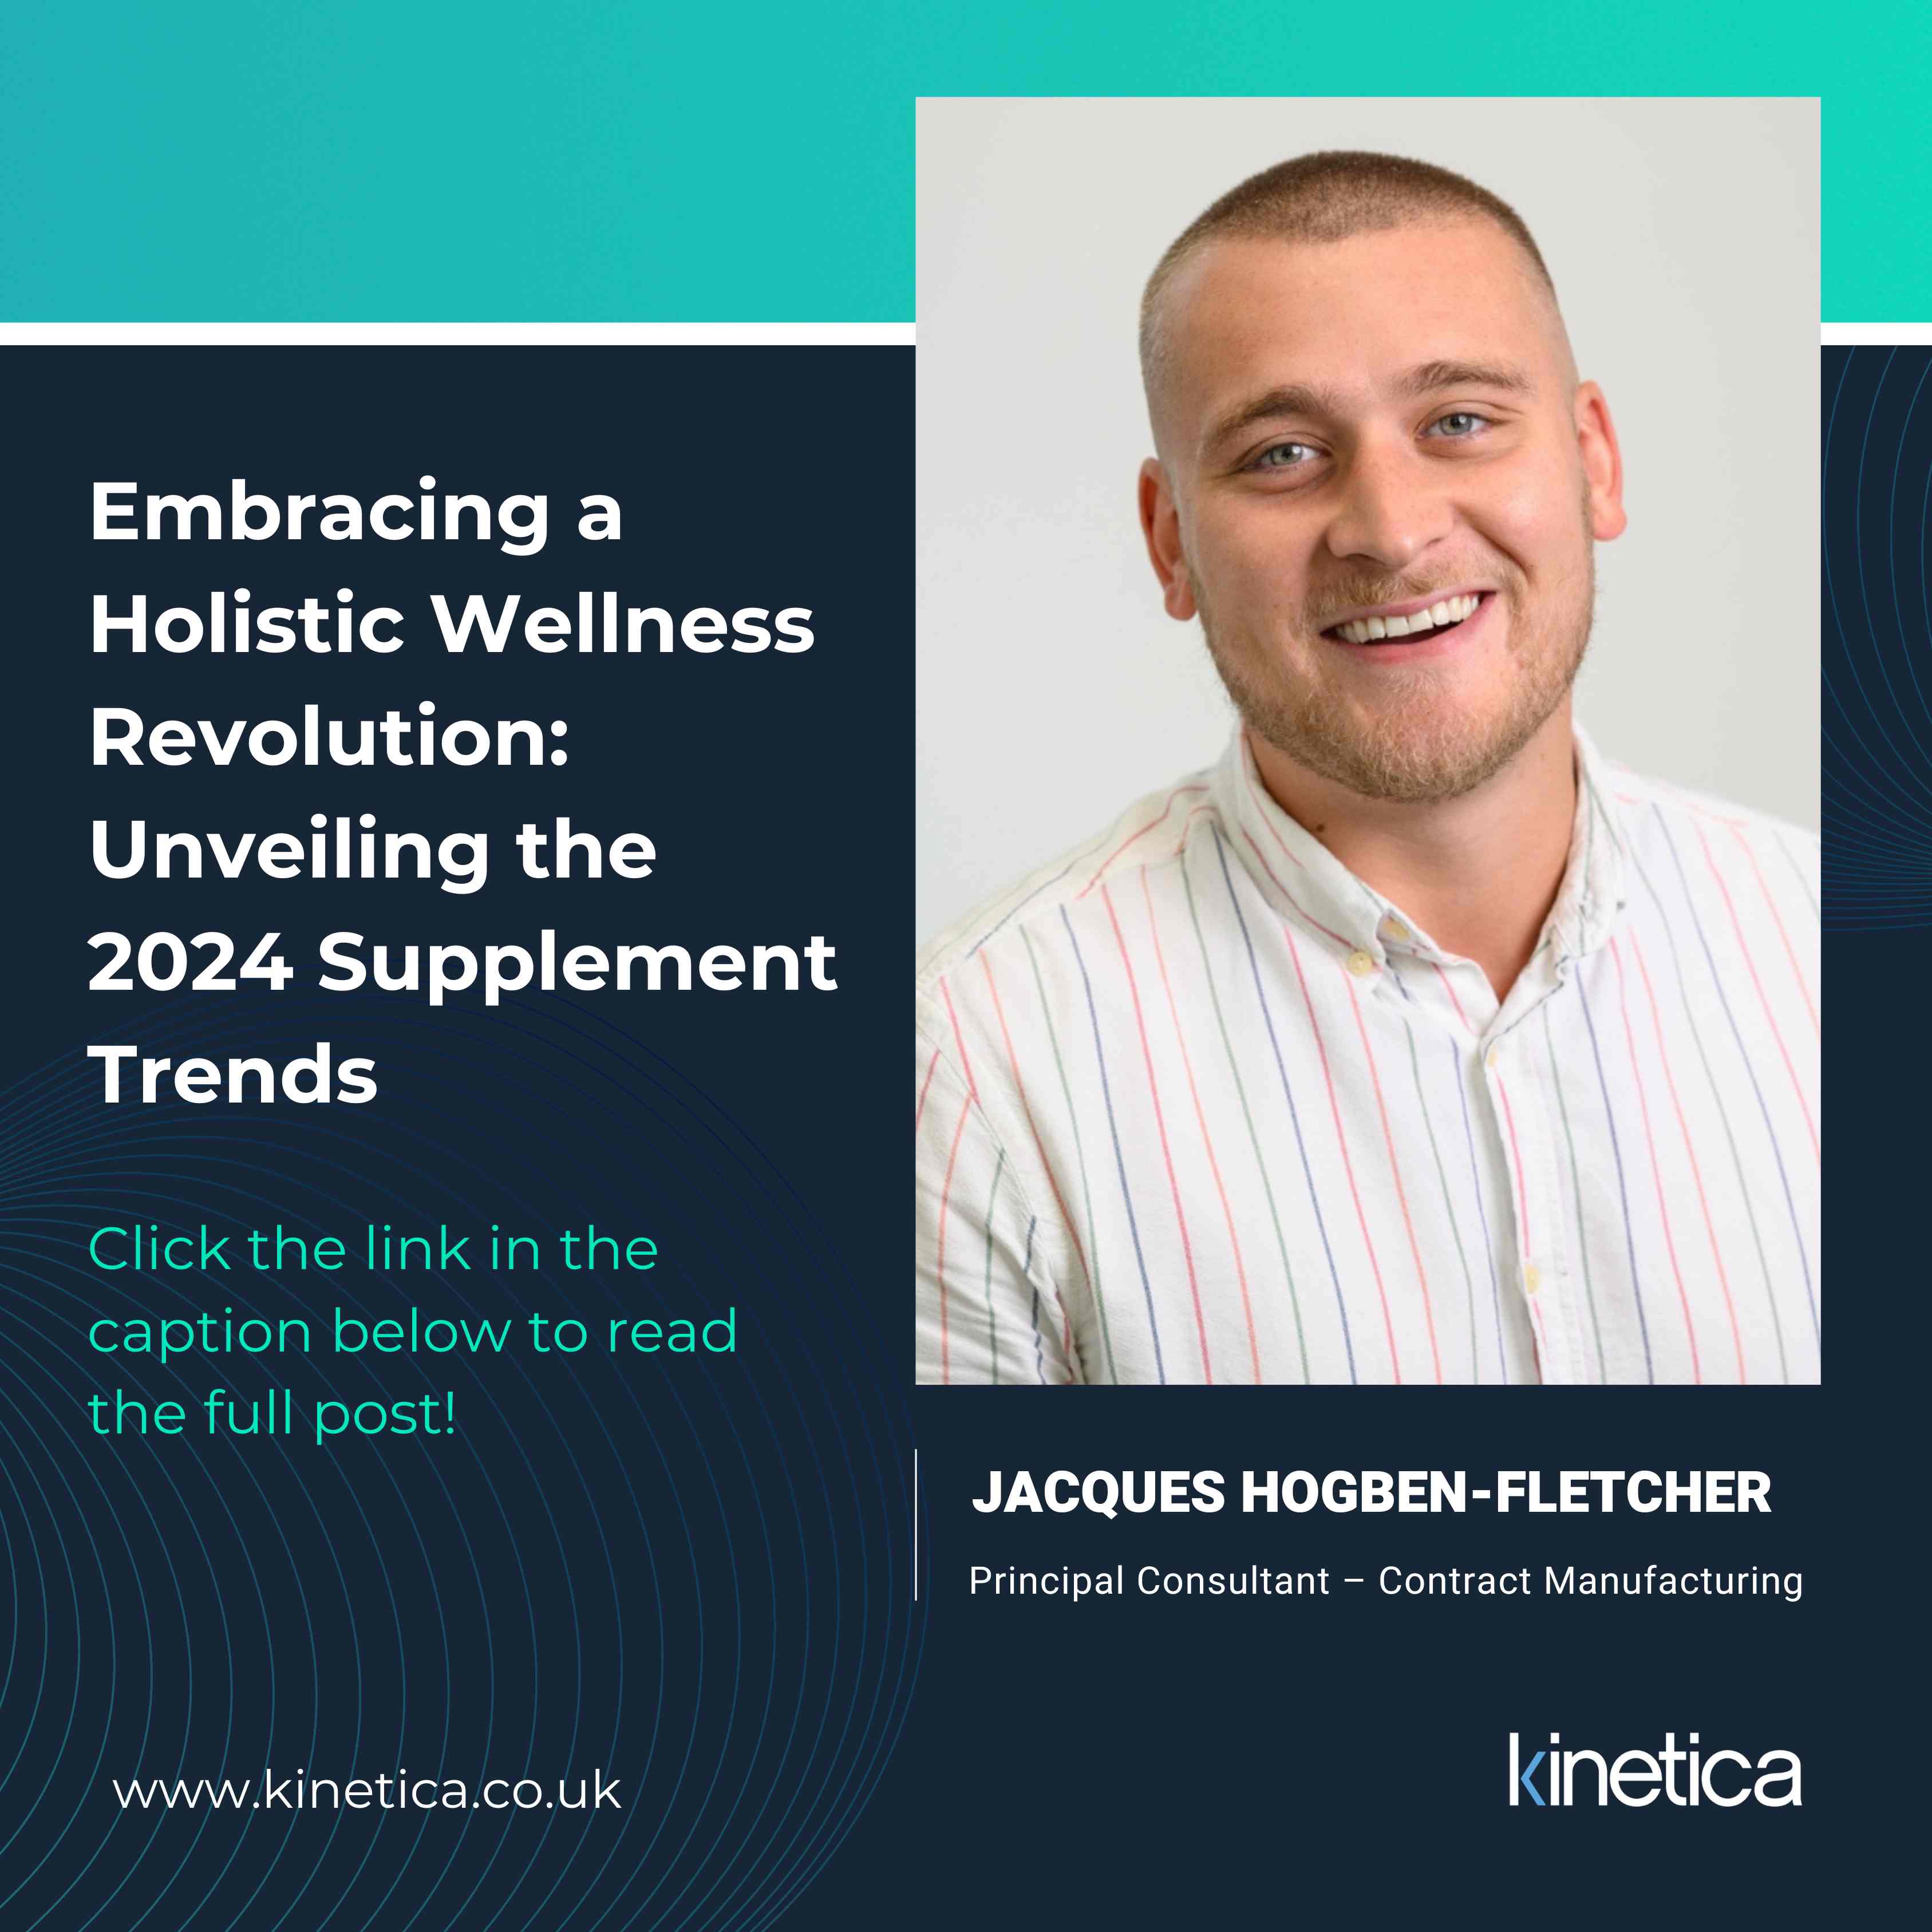 Embracing a Holistic Wellness Revolution: Unveiling the 2024 Supplement Trends